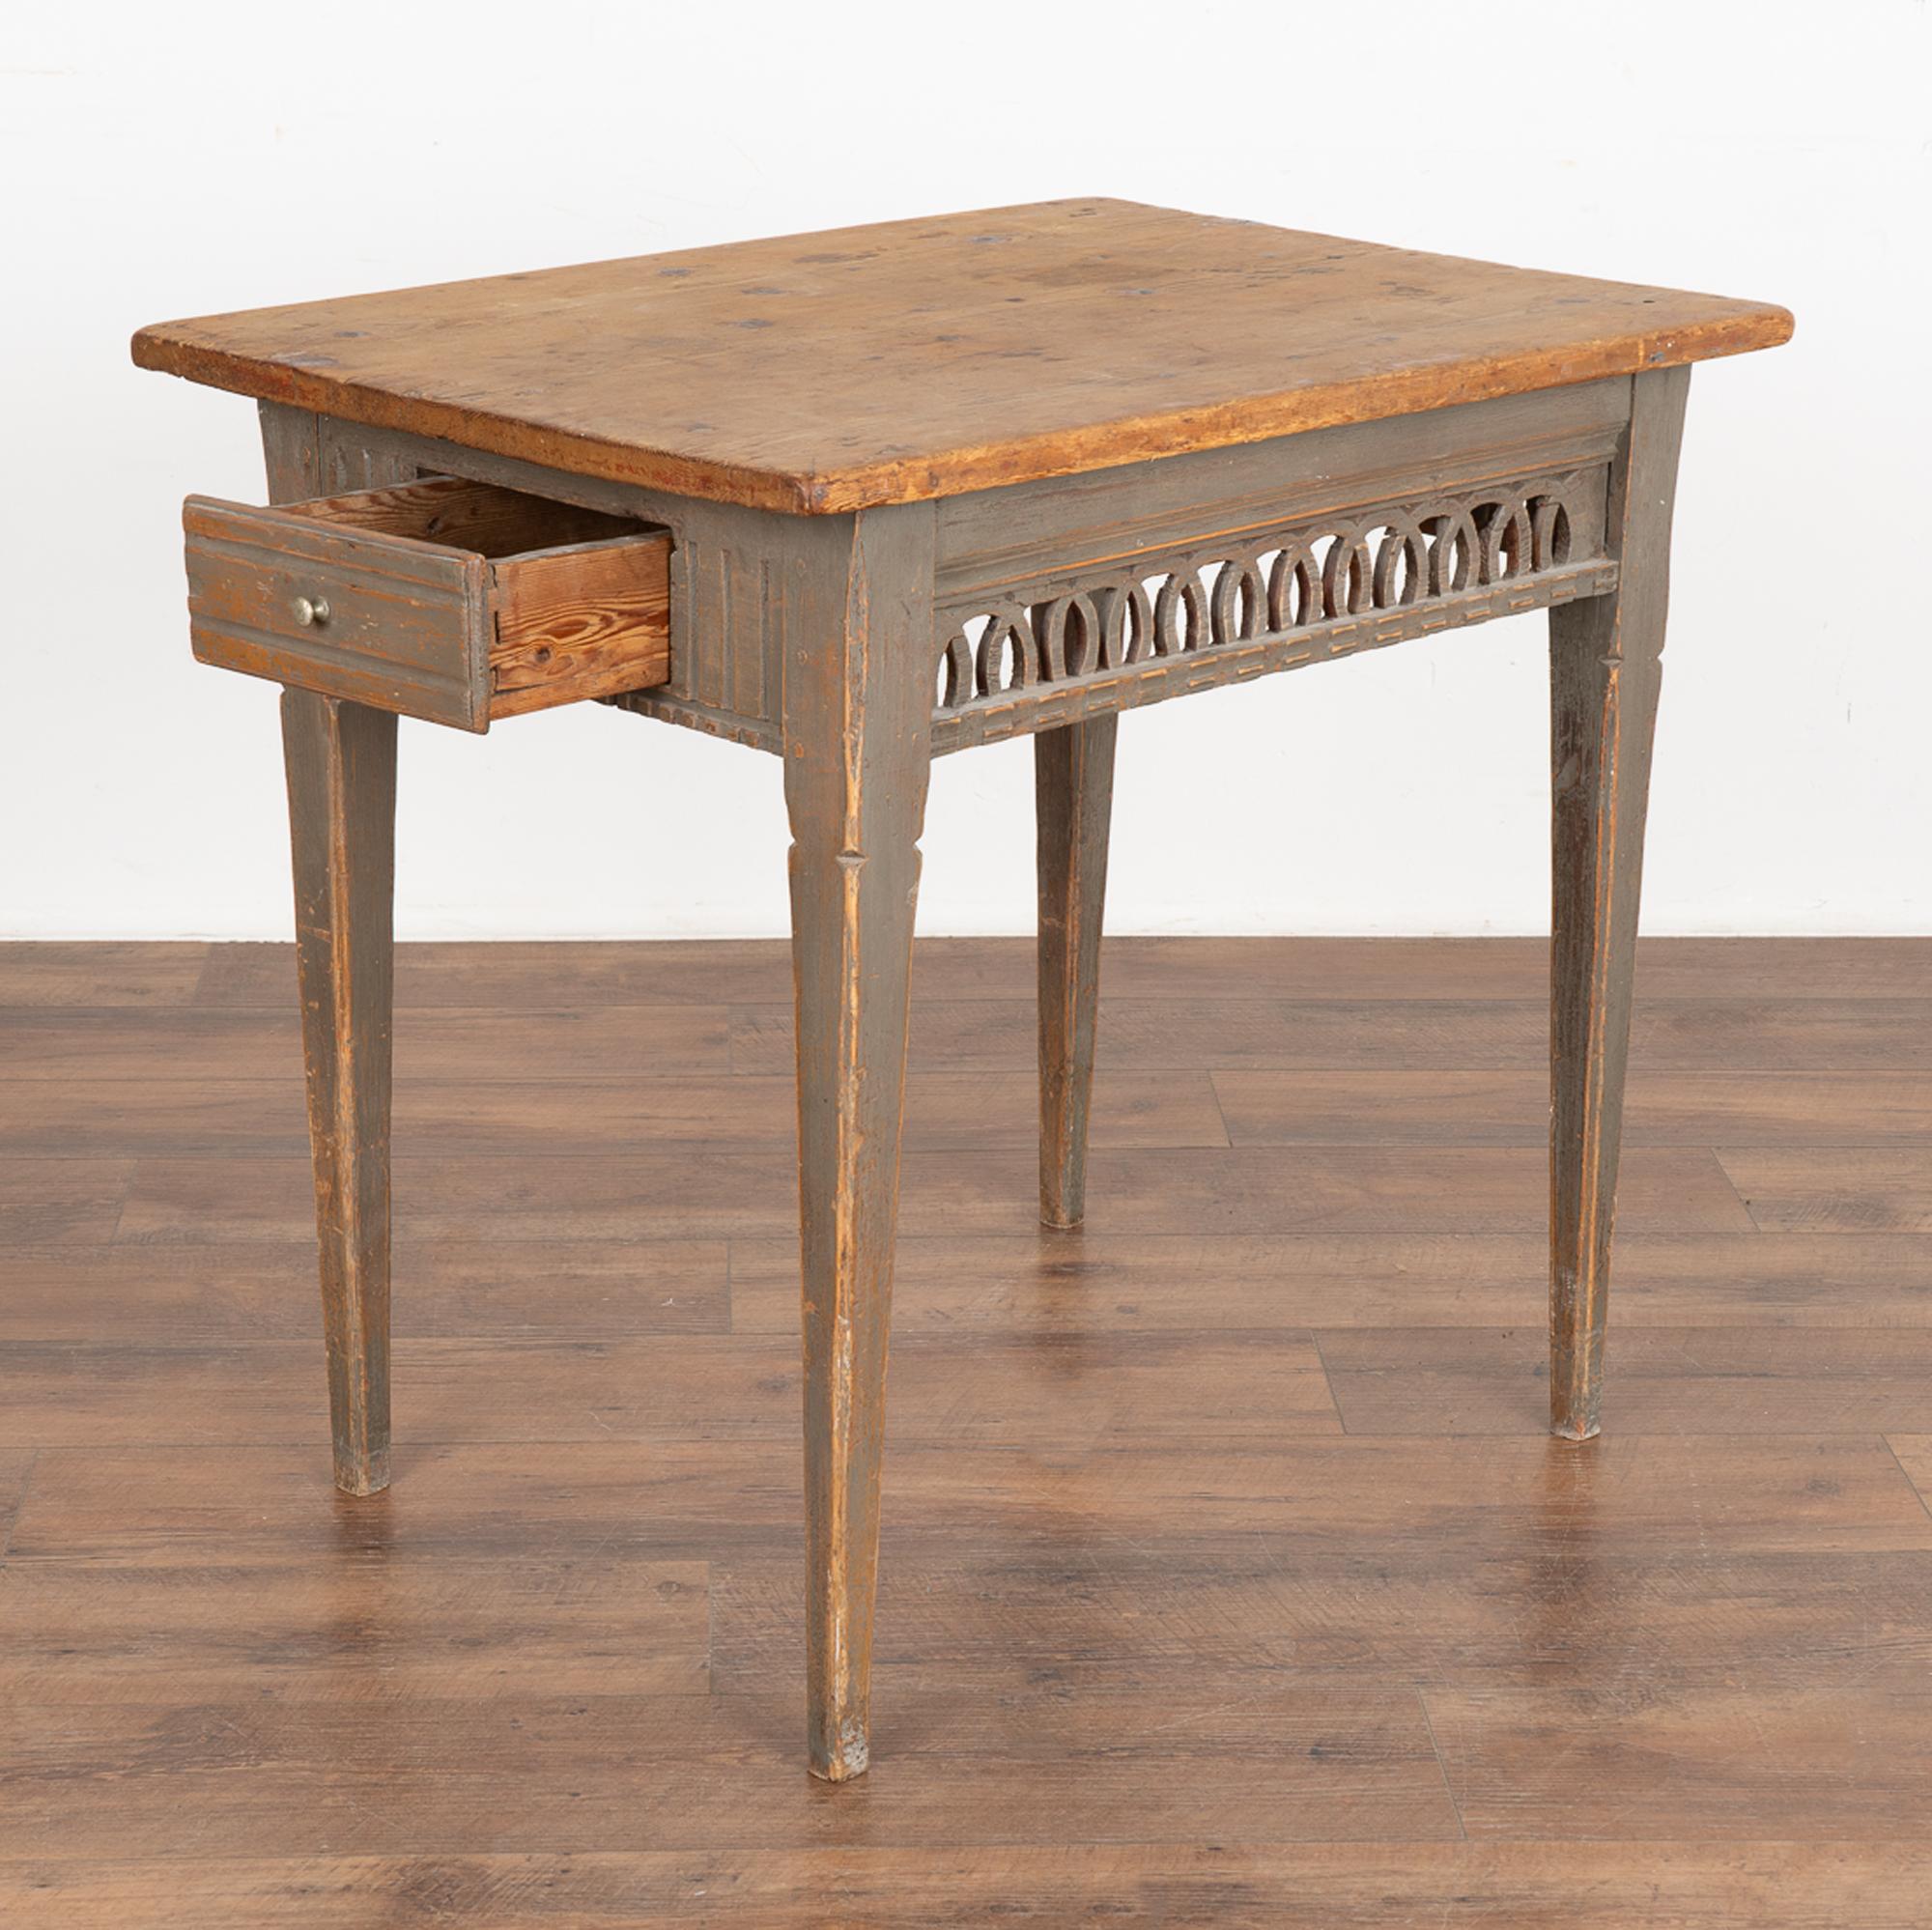 Country Gray Painted Side Table with Drawer, Sweden circa 1820-1840